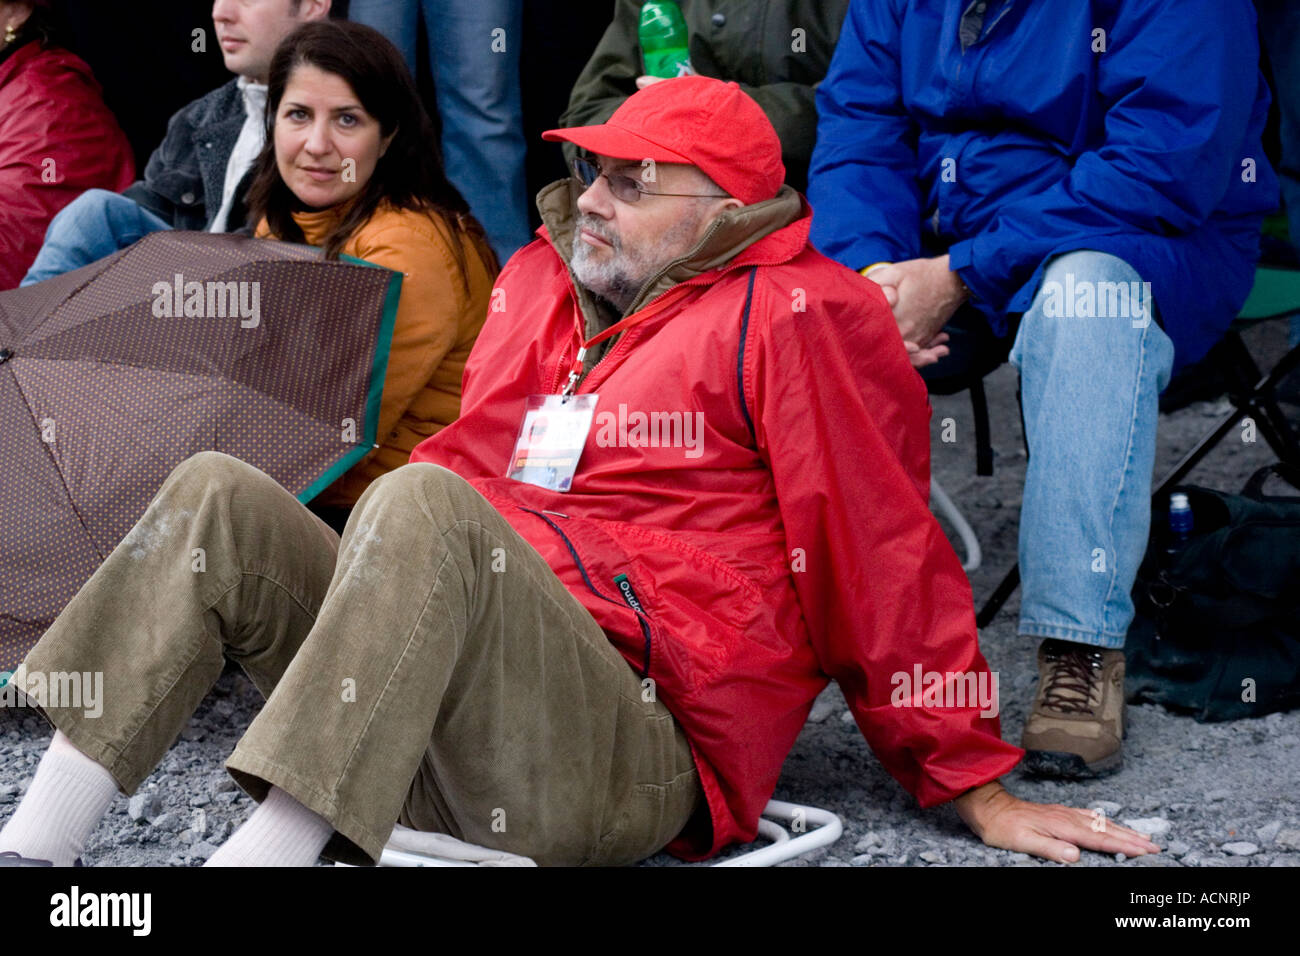 Older people at outdoor music festival Stock Photo